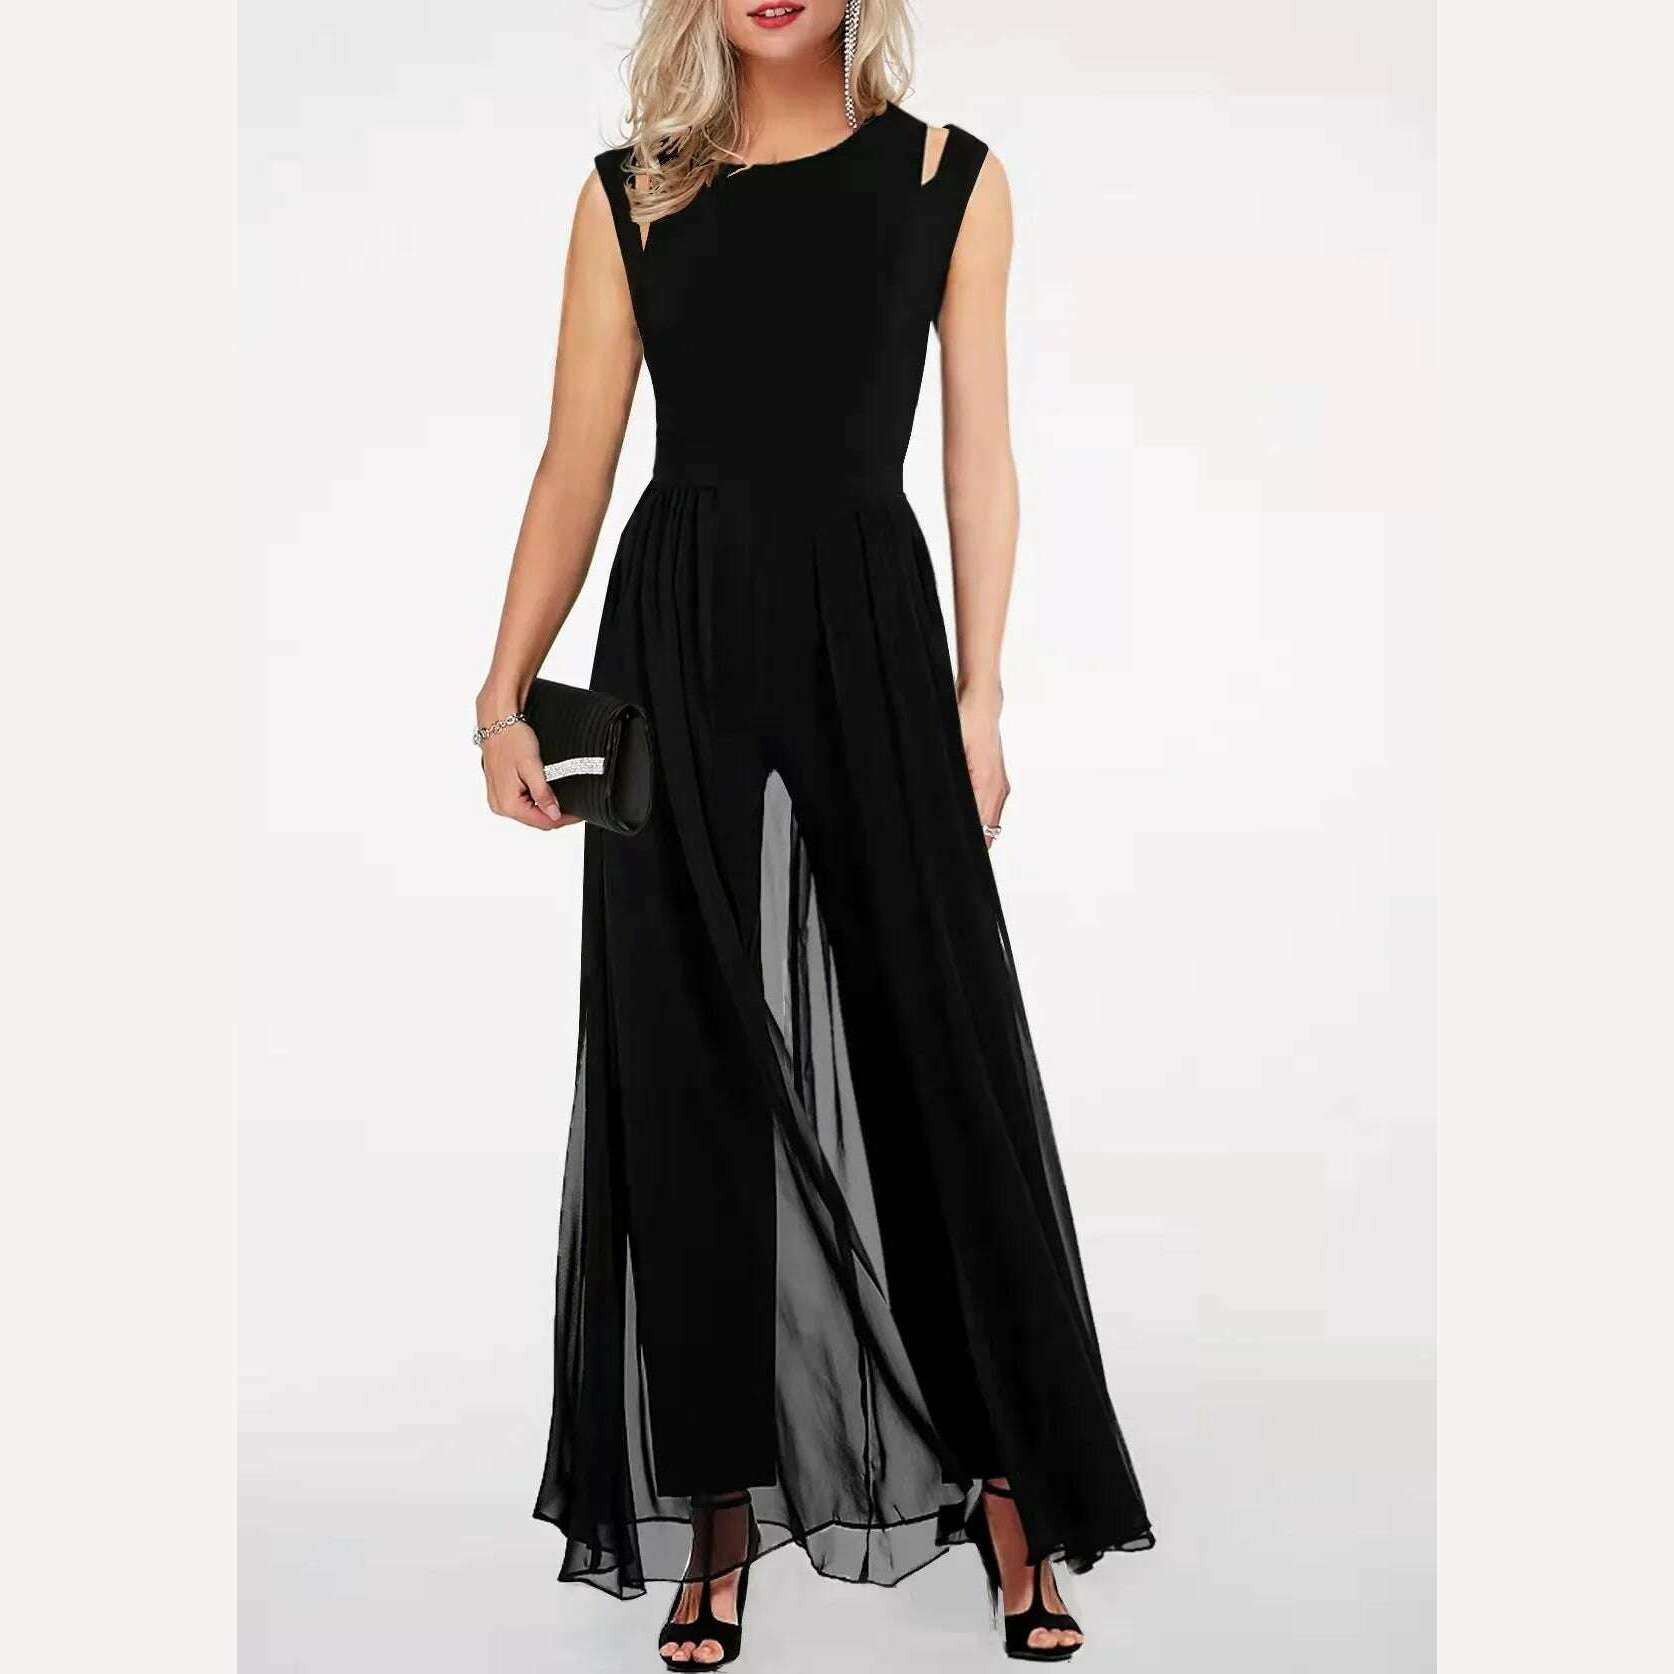 KIMLUD, New2023 Women's Summer Casual Jumpsuits Solid Elegant Sleeveless High Waist Women One Pieces Overalls Female Party Club Outfits, Black / S, KIMLUD Women's Clothes